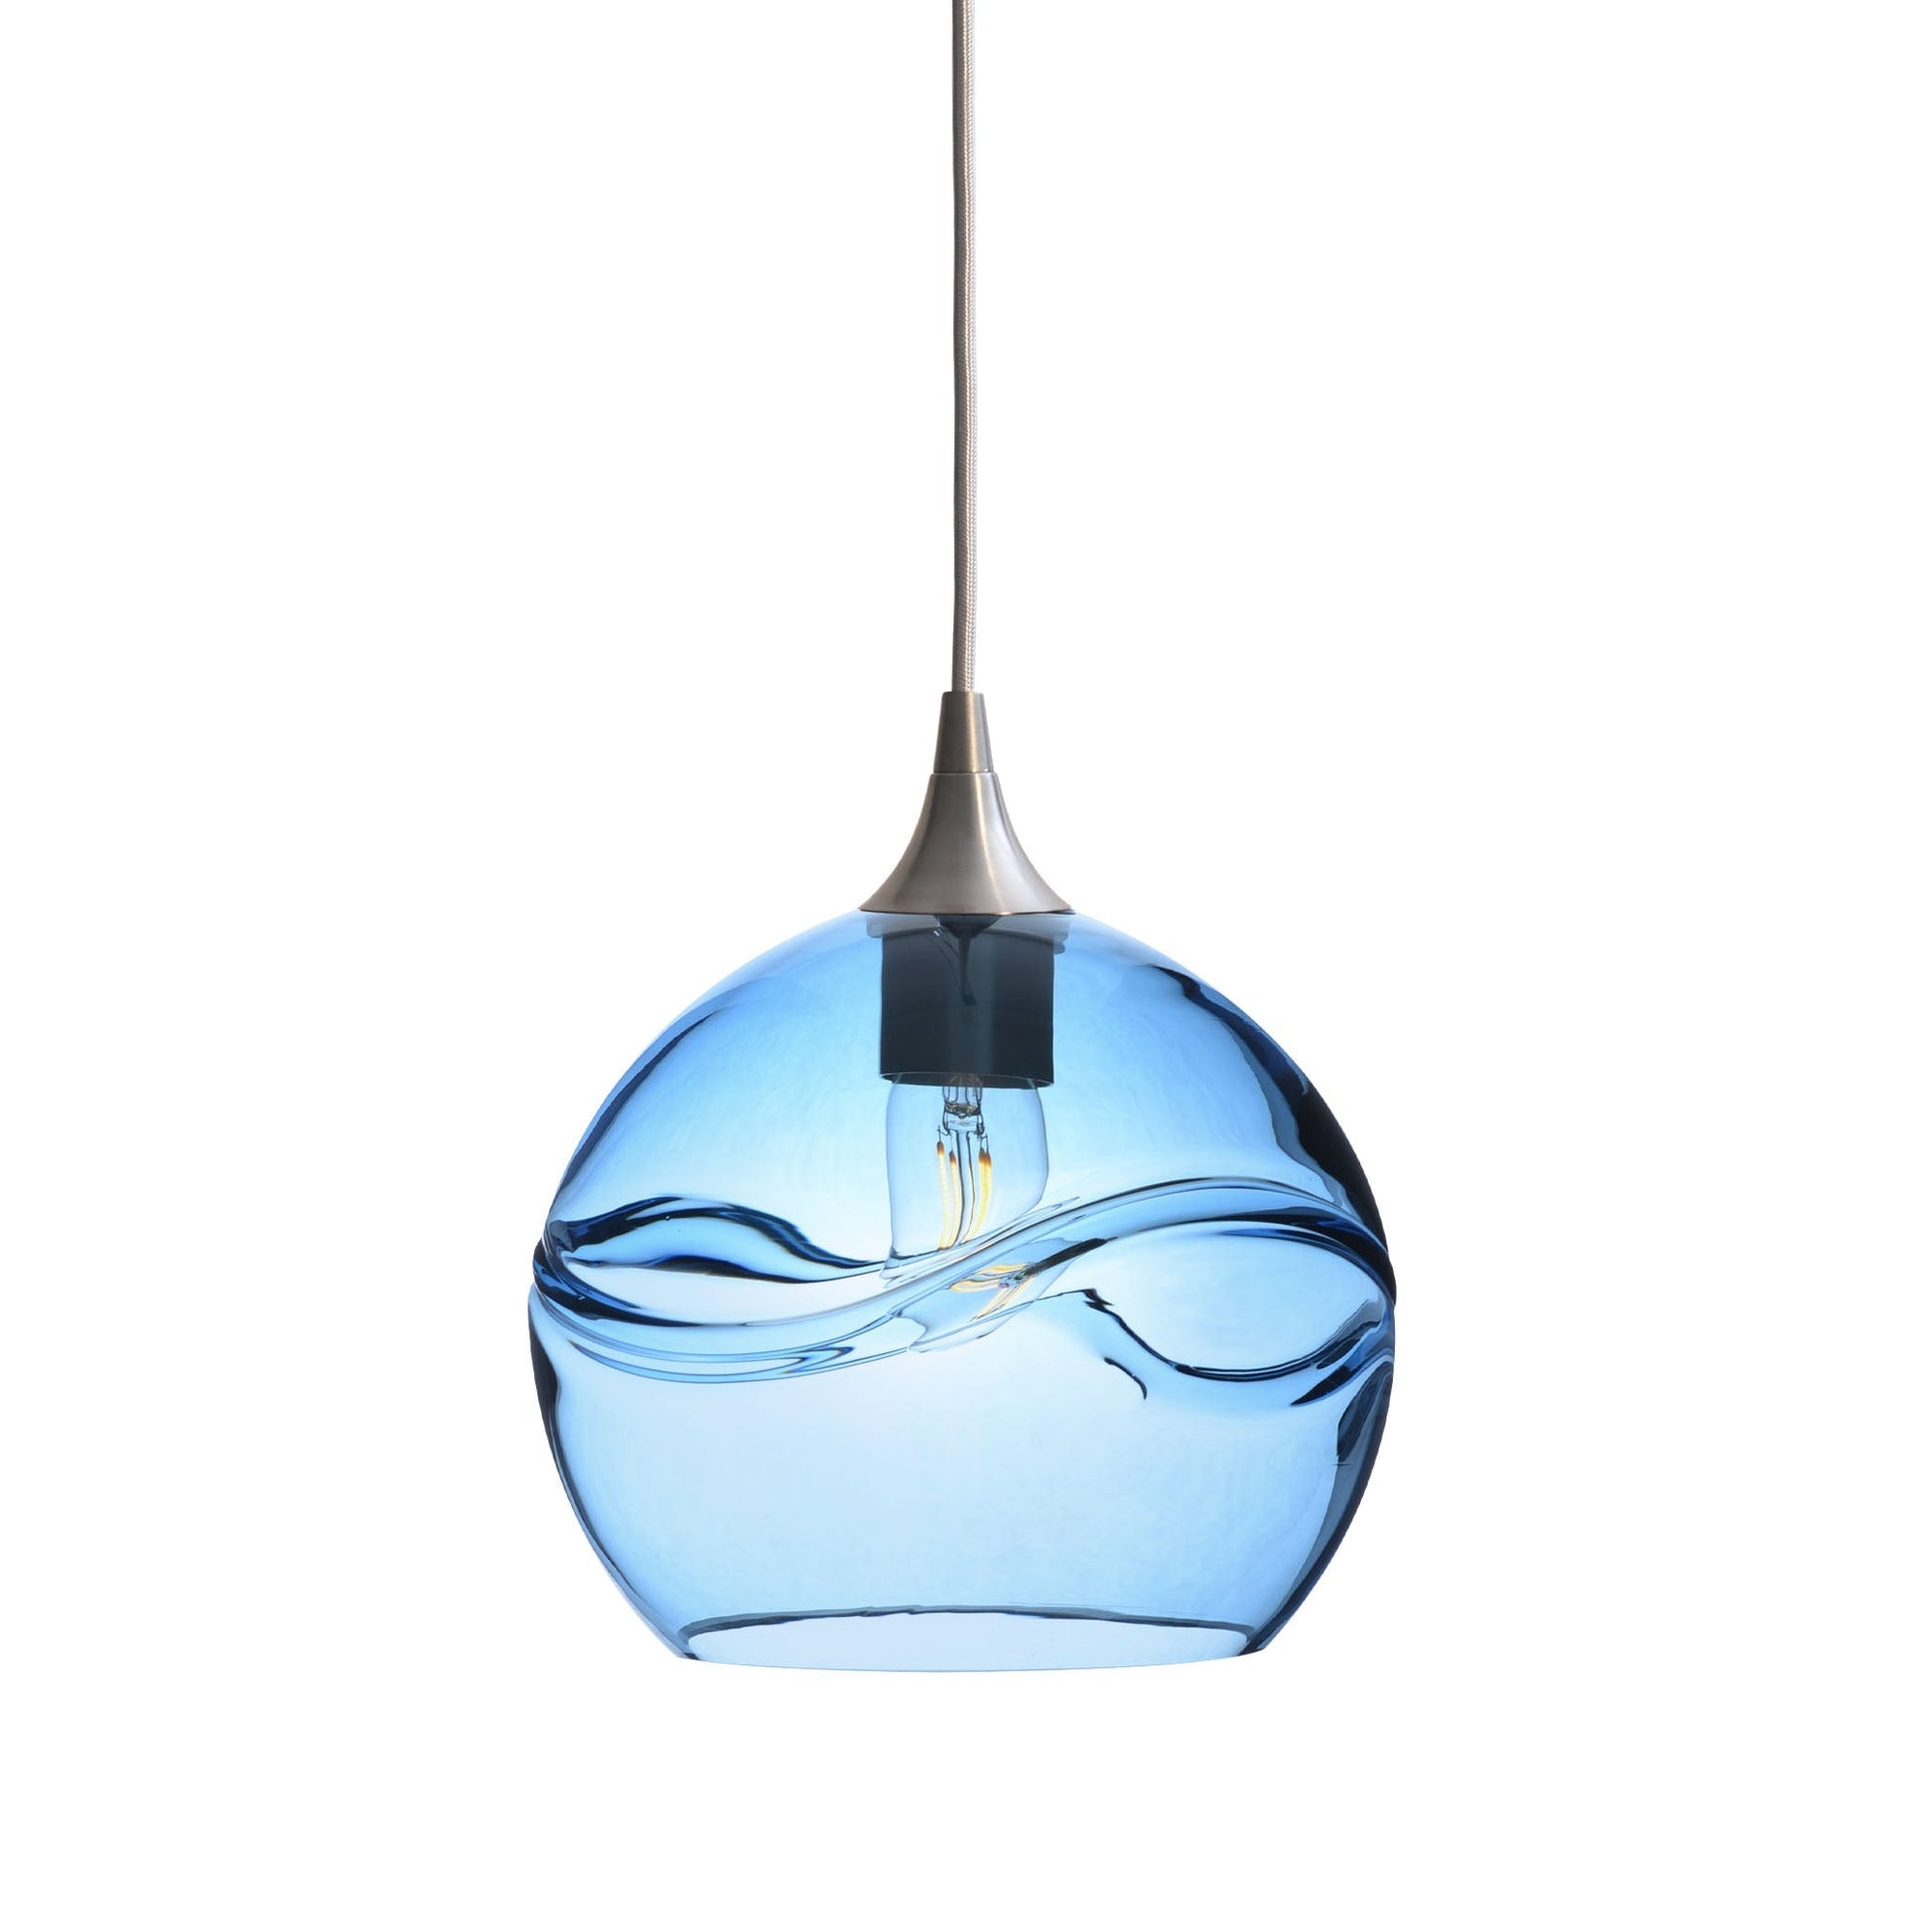 768 Swell: Single Pendant Light-Glass-Bicycle Glass Co - Hotshop-Steel Blue-Brushed Nickel-Bicycle Glass Co